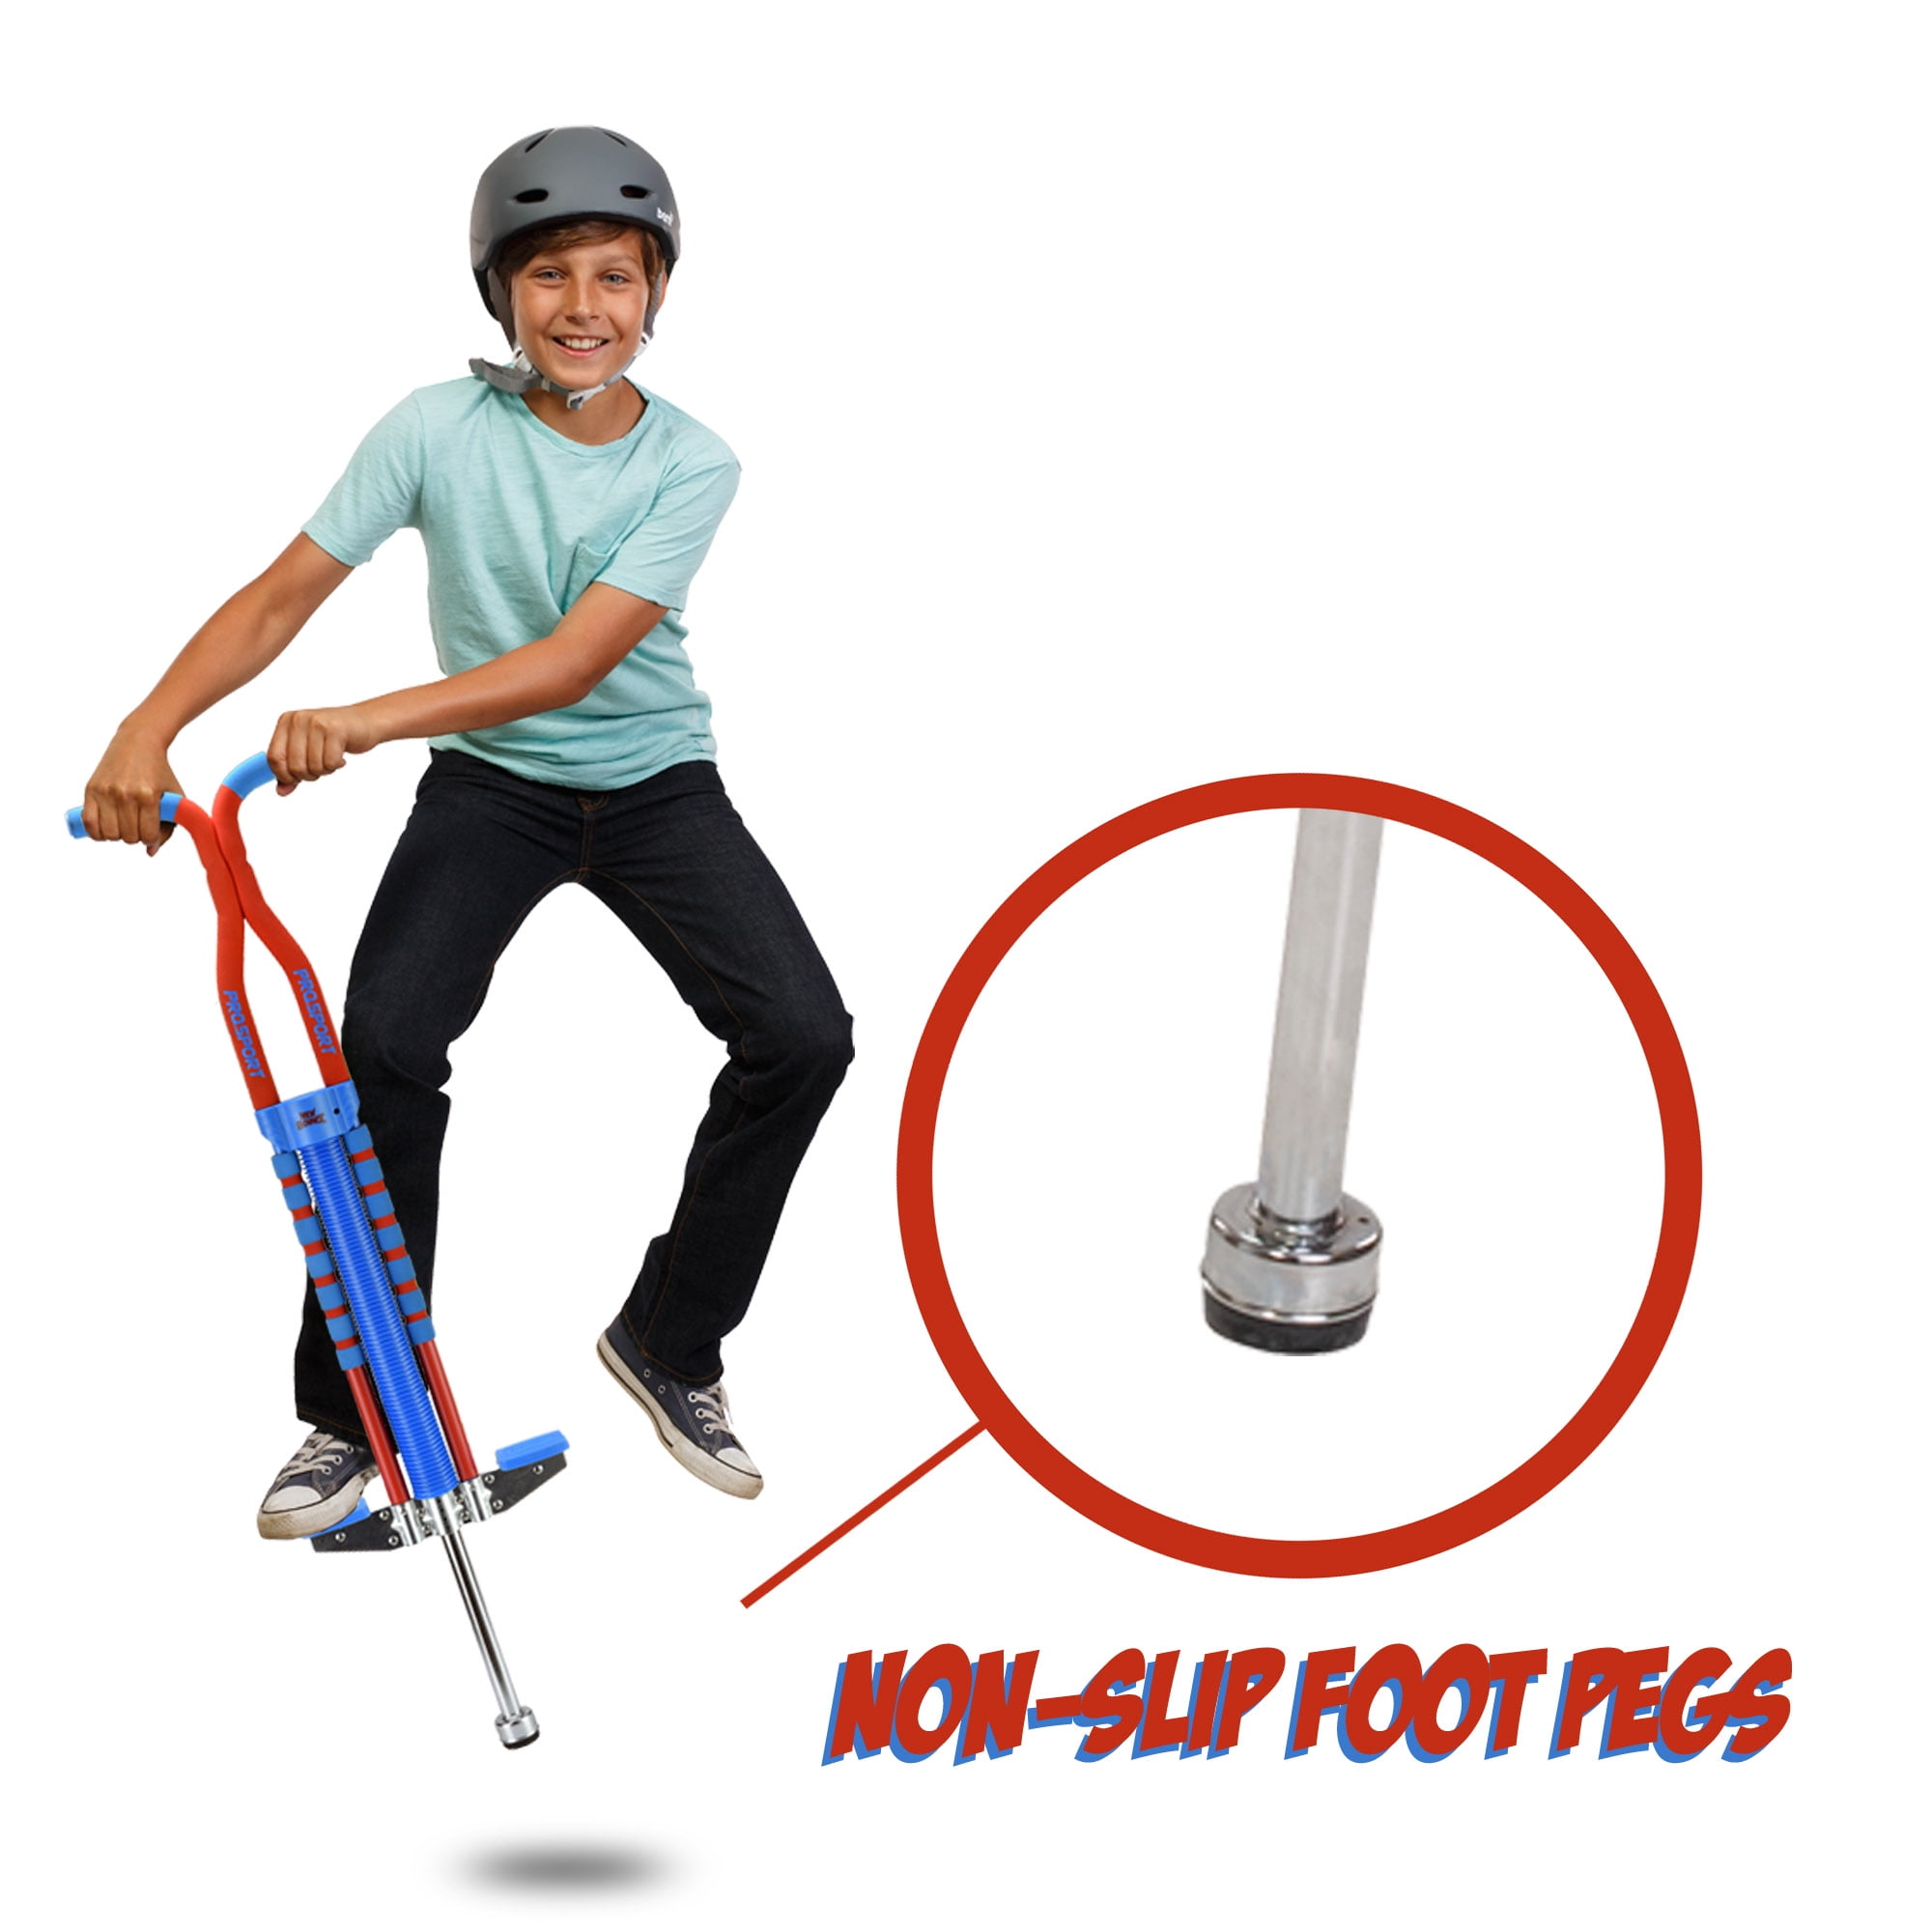 PogoStick for Hours of Wholesome Fun Quality Rubber Pogo Stick for Kids Boys & Girls Ages 5 & Up 33 to 77 Lbs Pro Sport Edition Easy Grip 